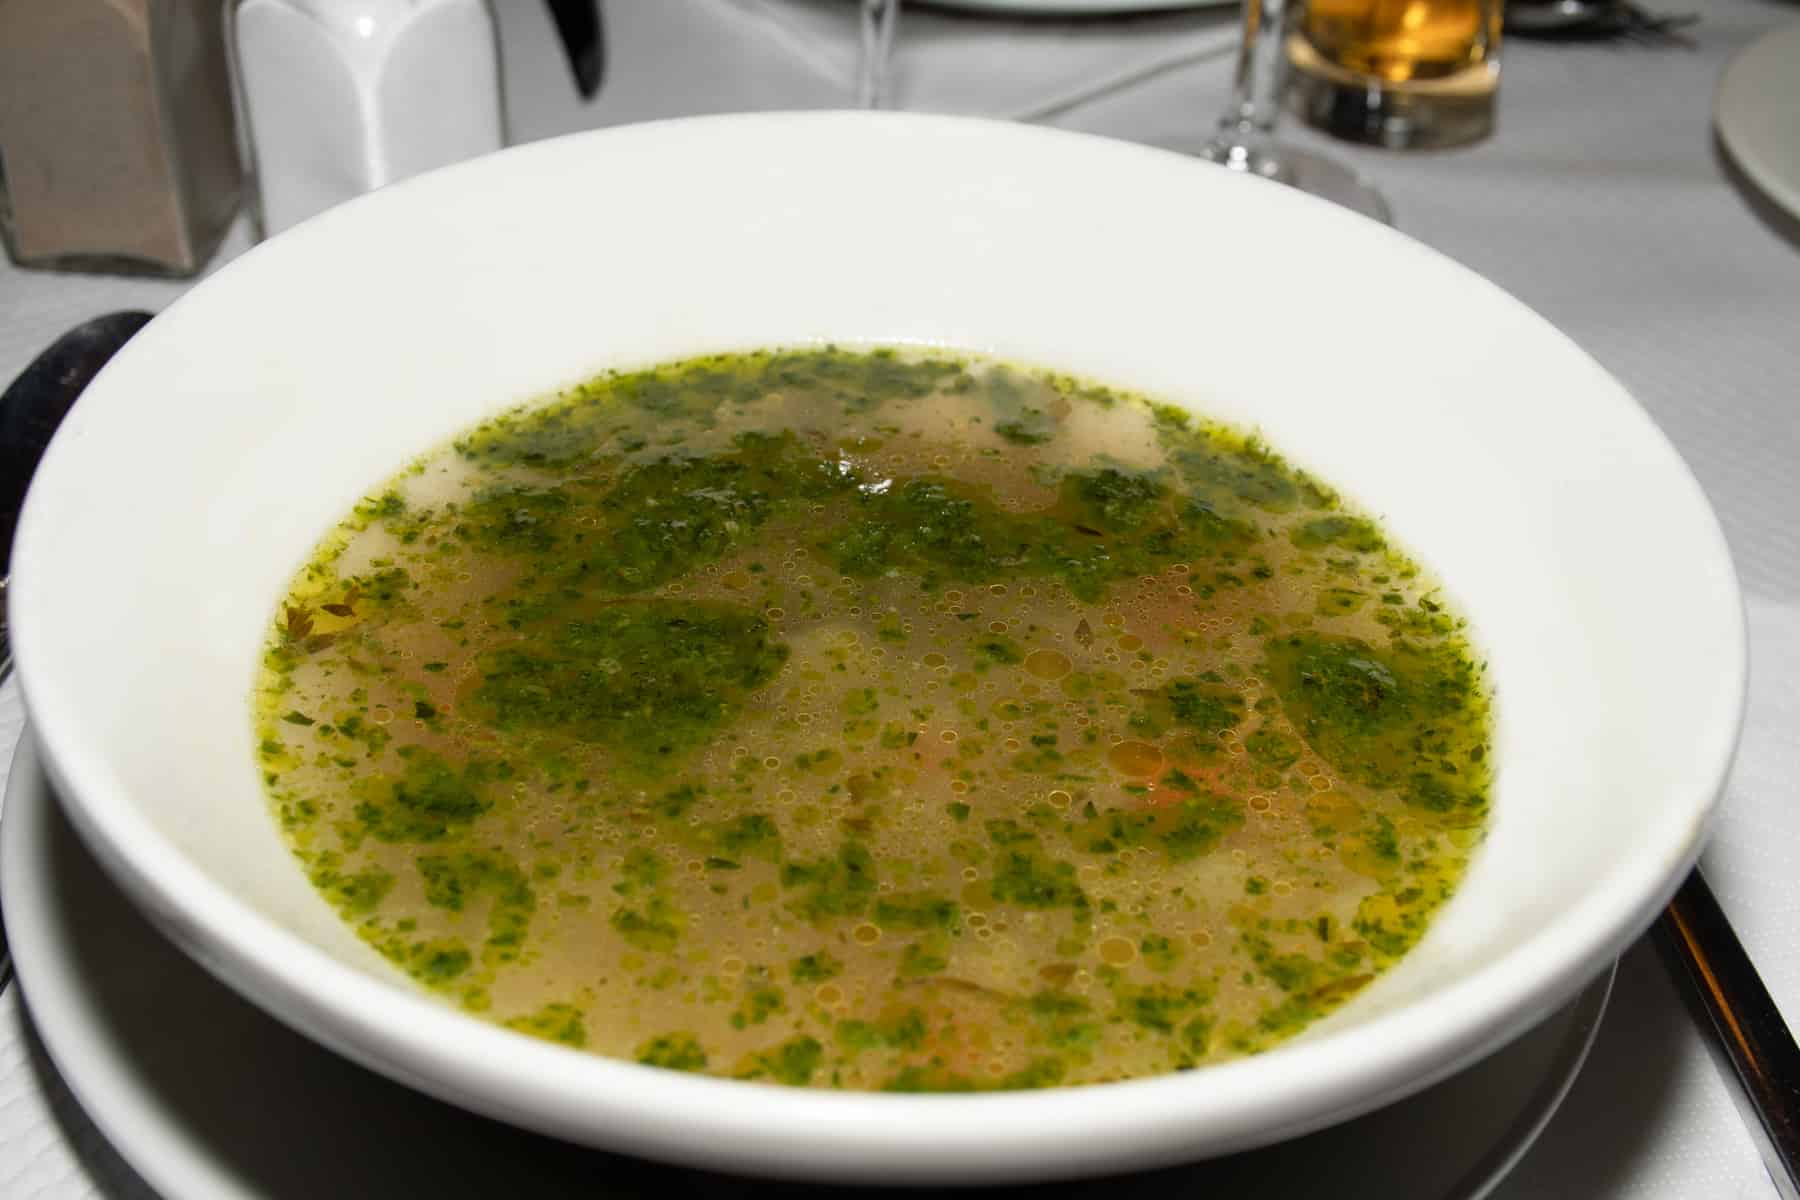 Soup au pistou (pesto) in a white bowl being served in a restaurant. traditional authentic